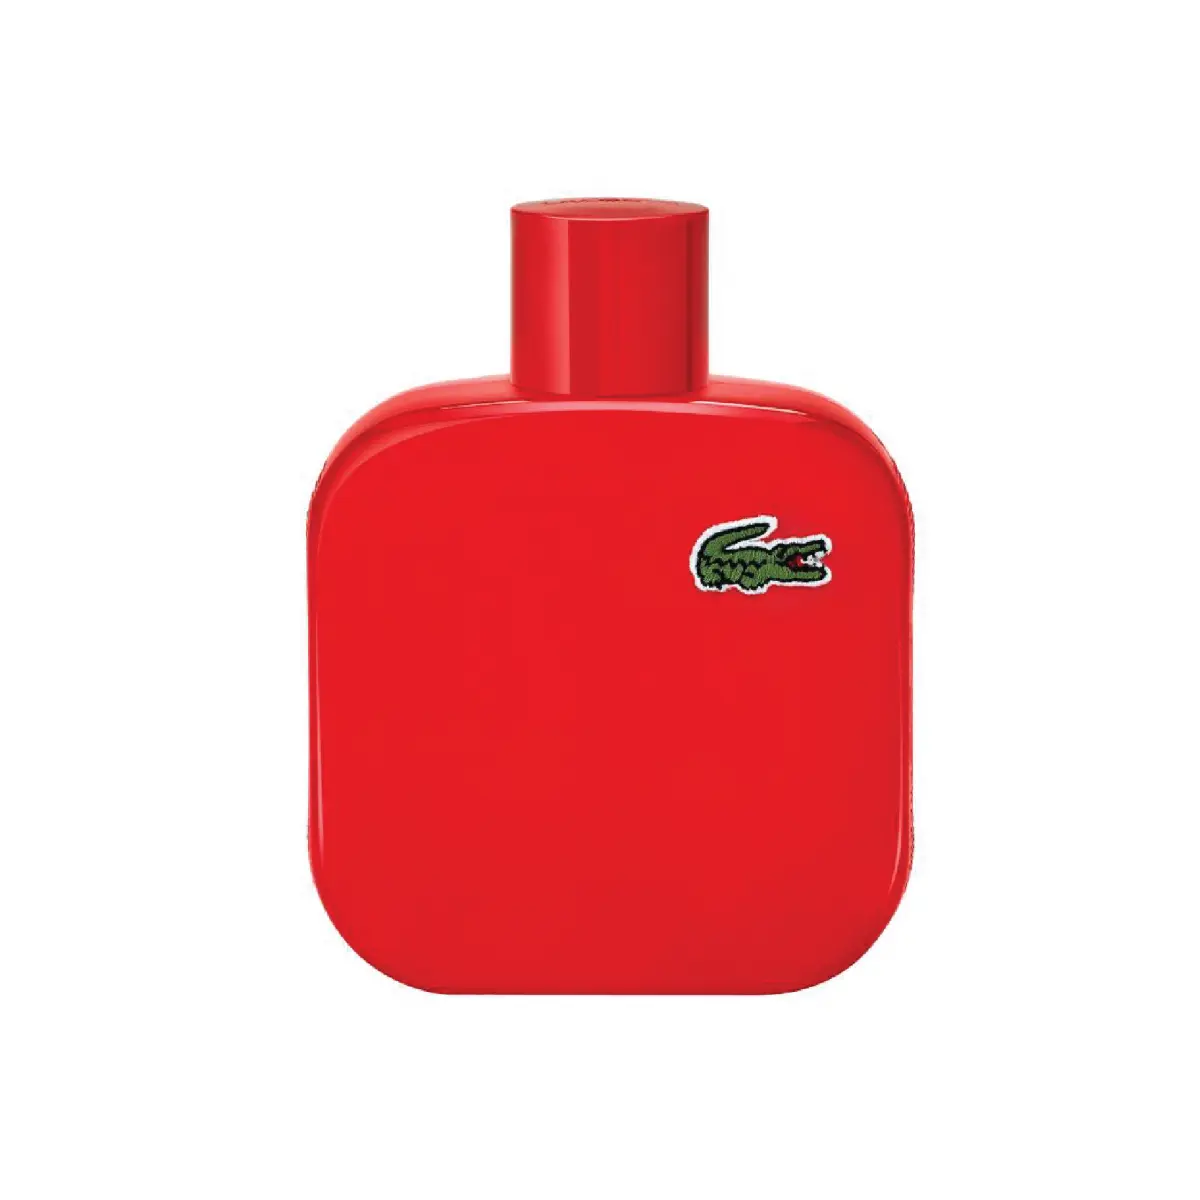 Lacoste L.12.12 Rouge Energetic